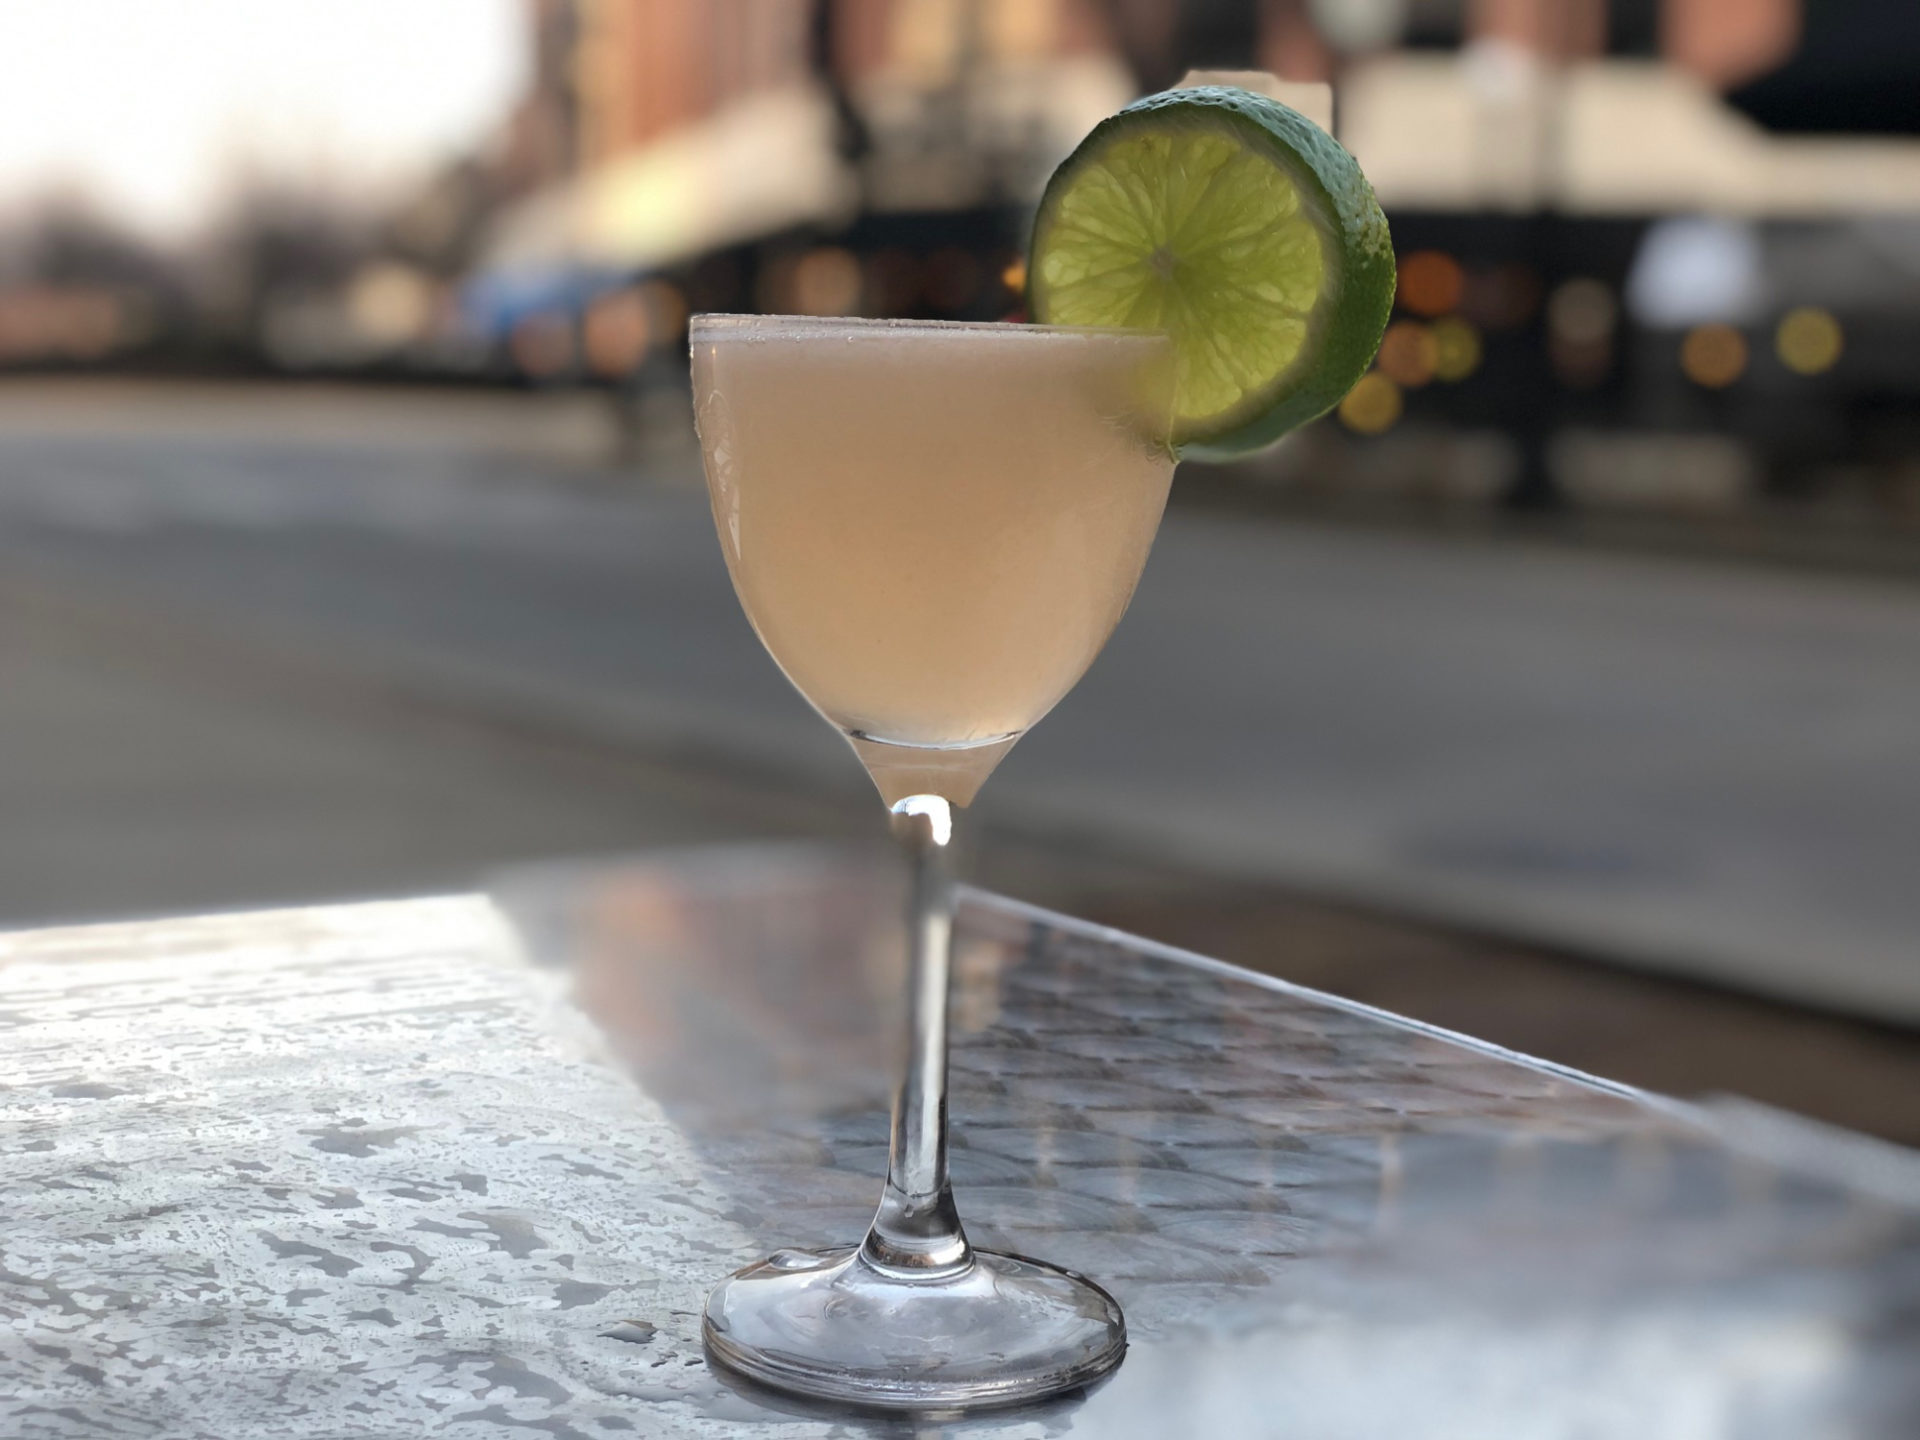 A light-colored drink in a stemmed glass, with a lime garnish, is sitting on a metal table. There is a street and buildings in the background.